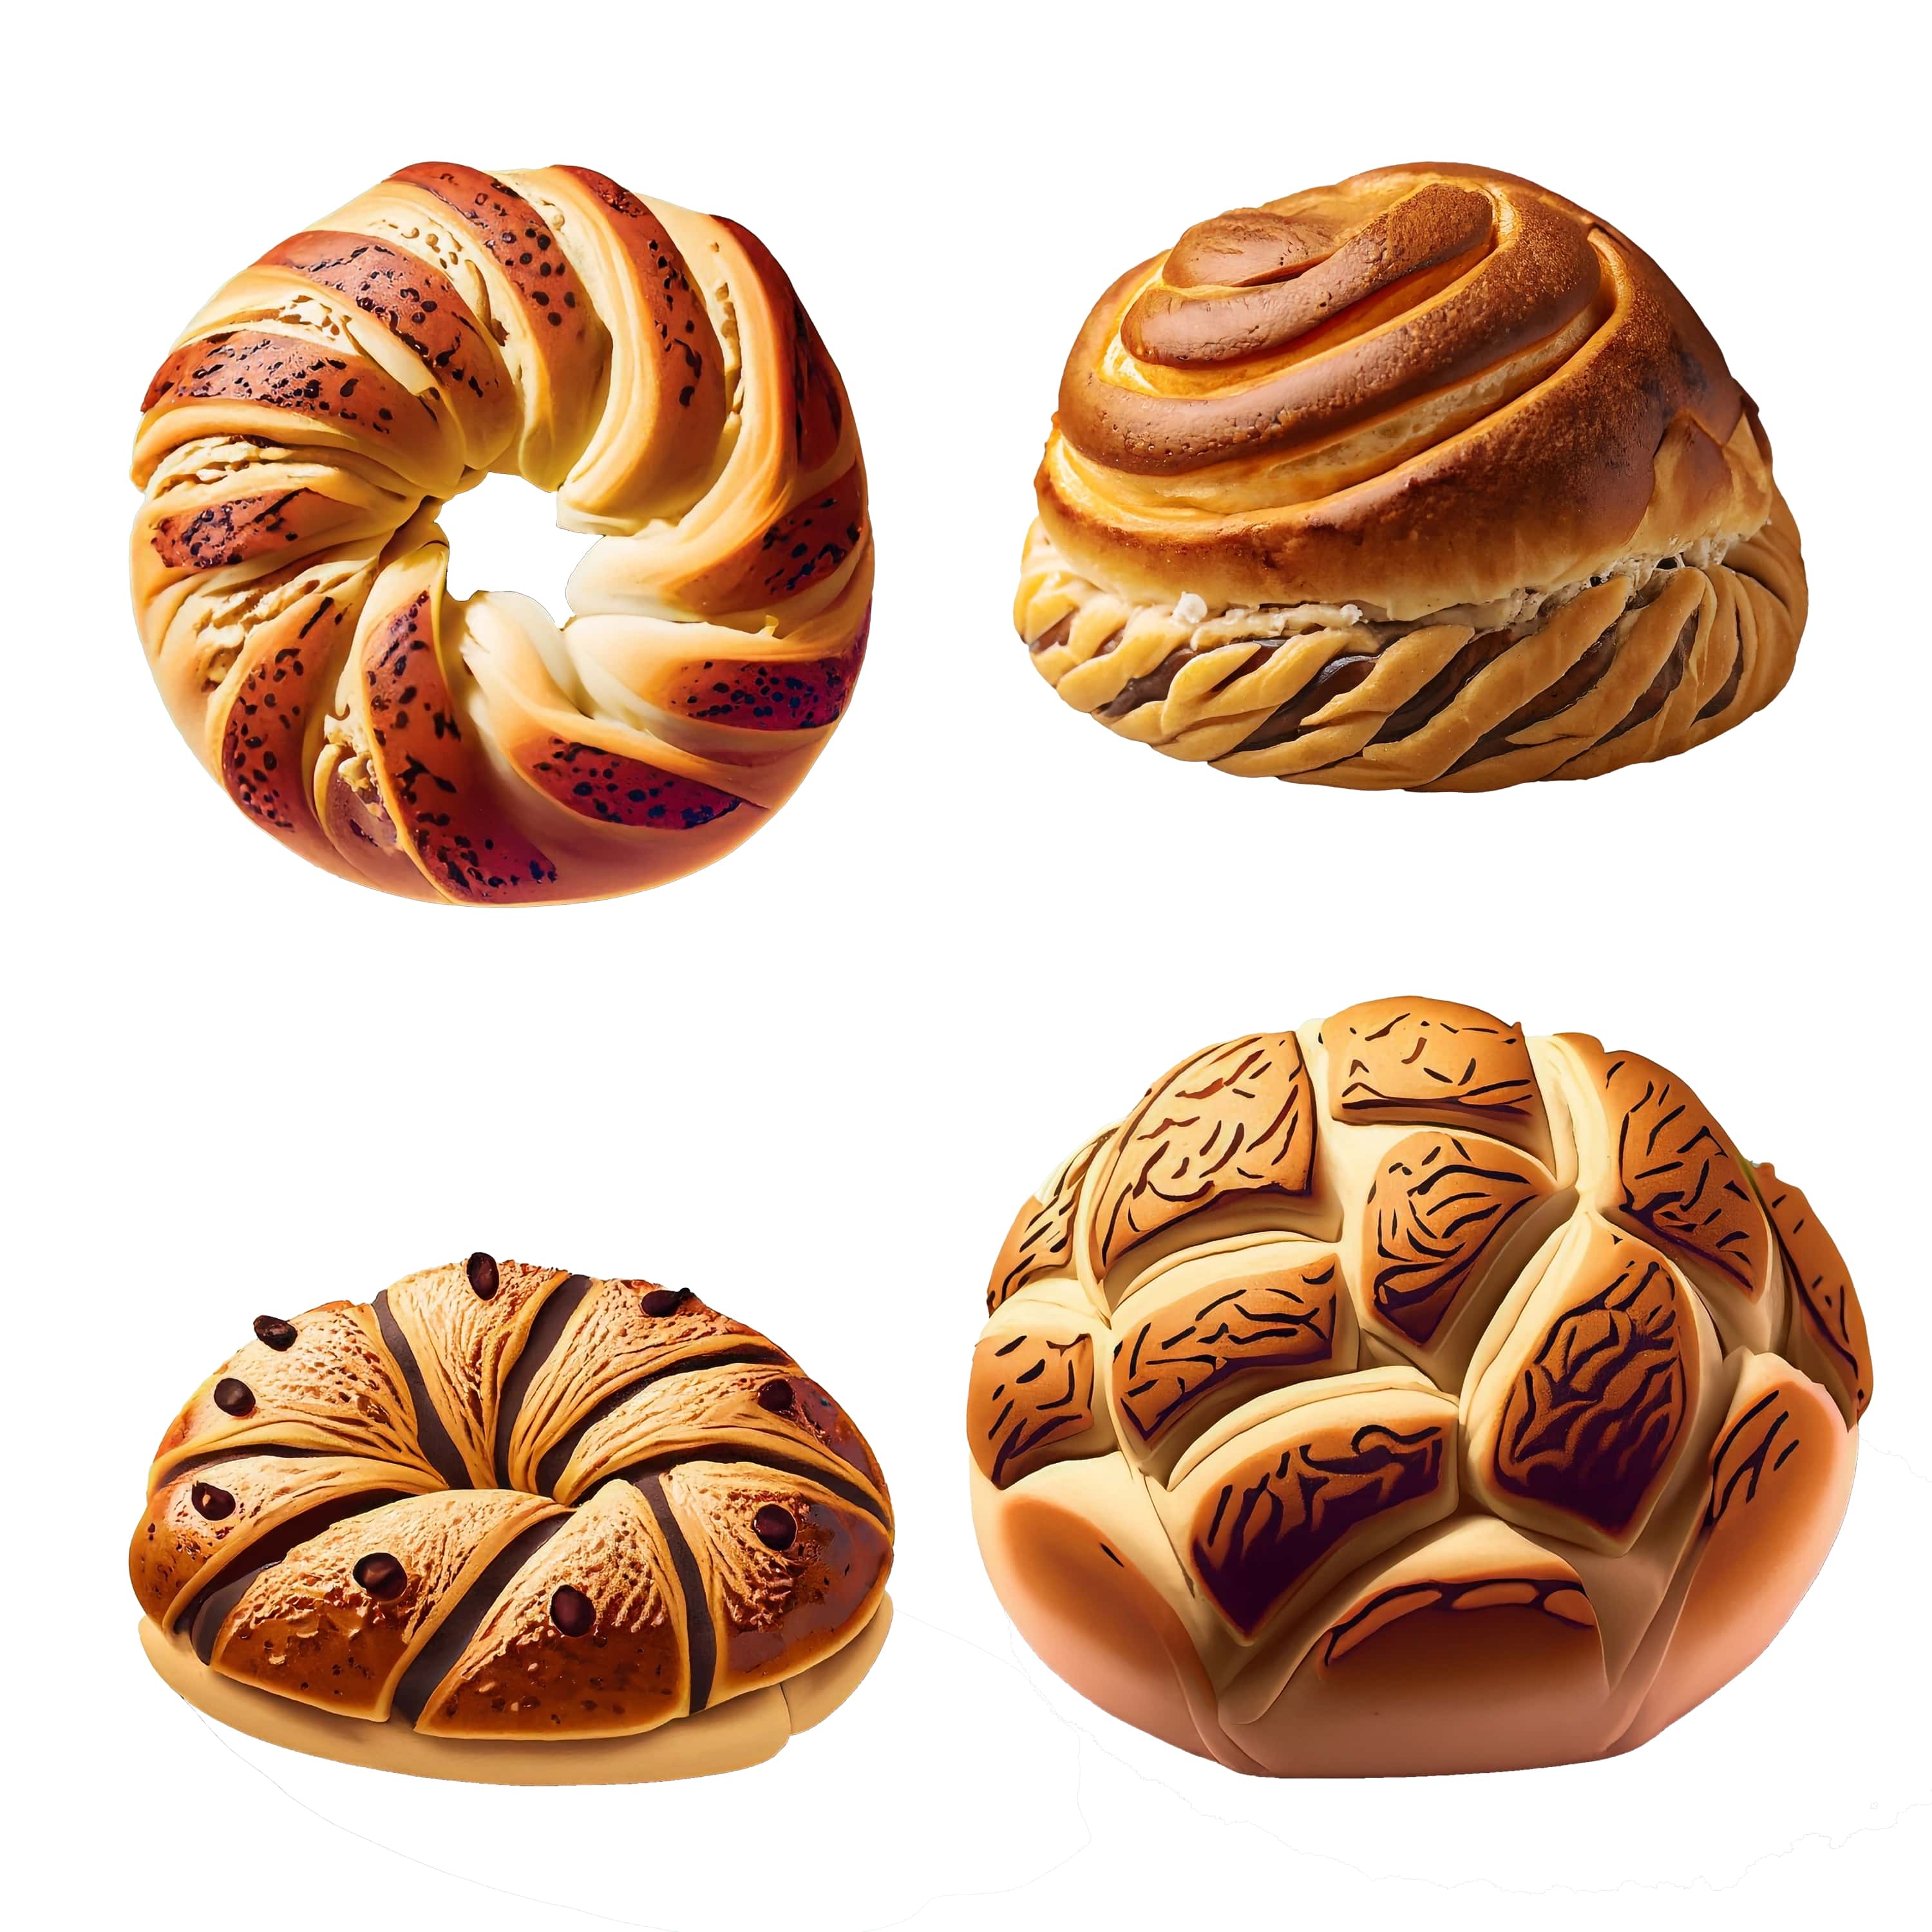 bakery bun products isolated on a white background. 3d rendering. 999